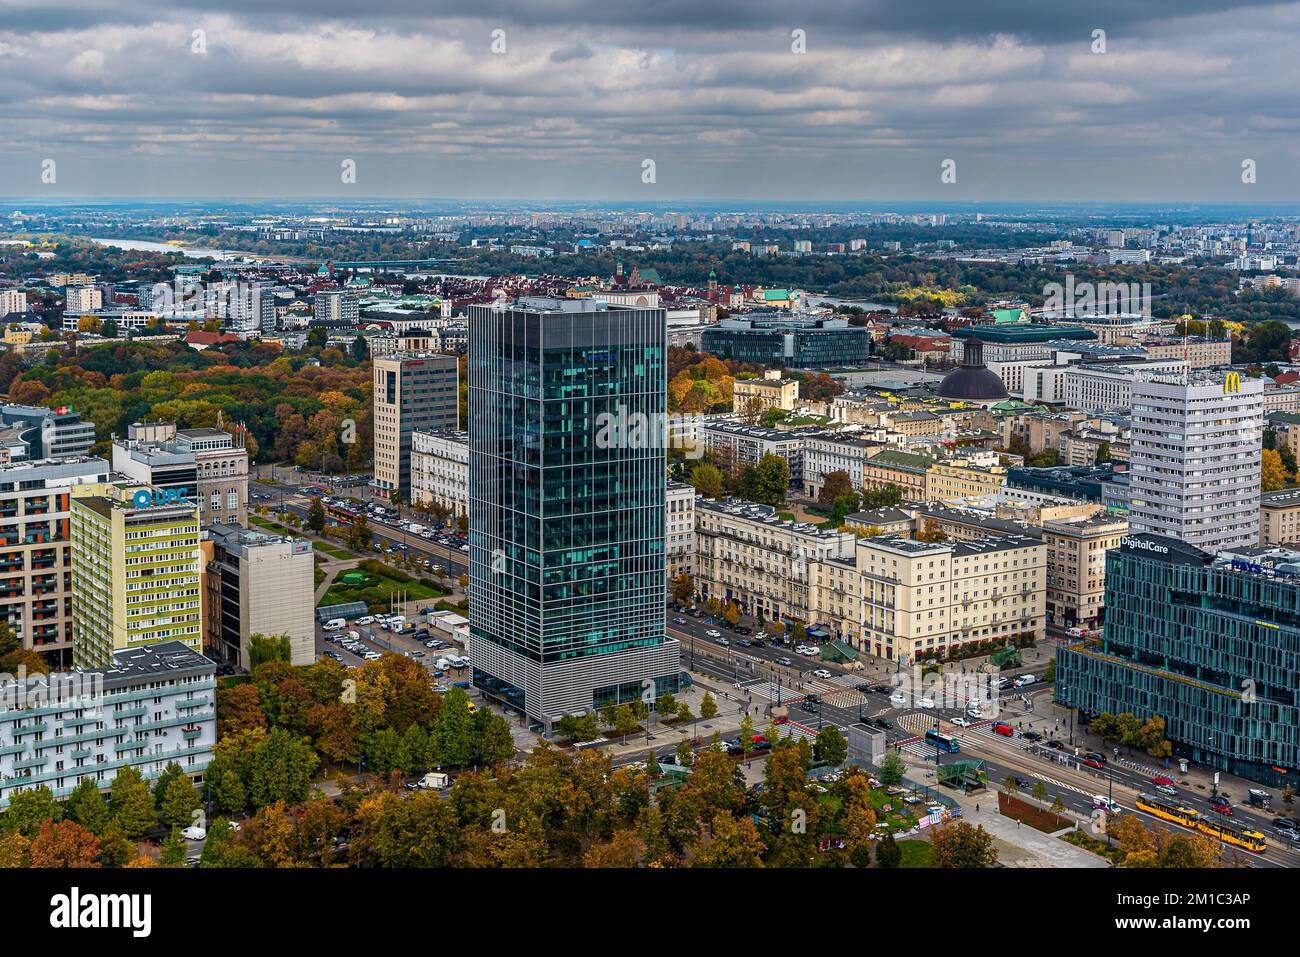 Poland.Warsaw.View from the Palace of Culture and Science to the Old Town. Stock Photo